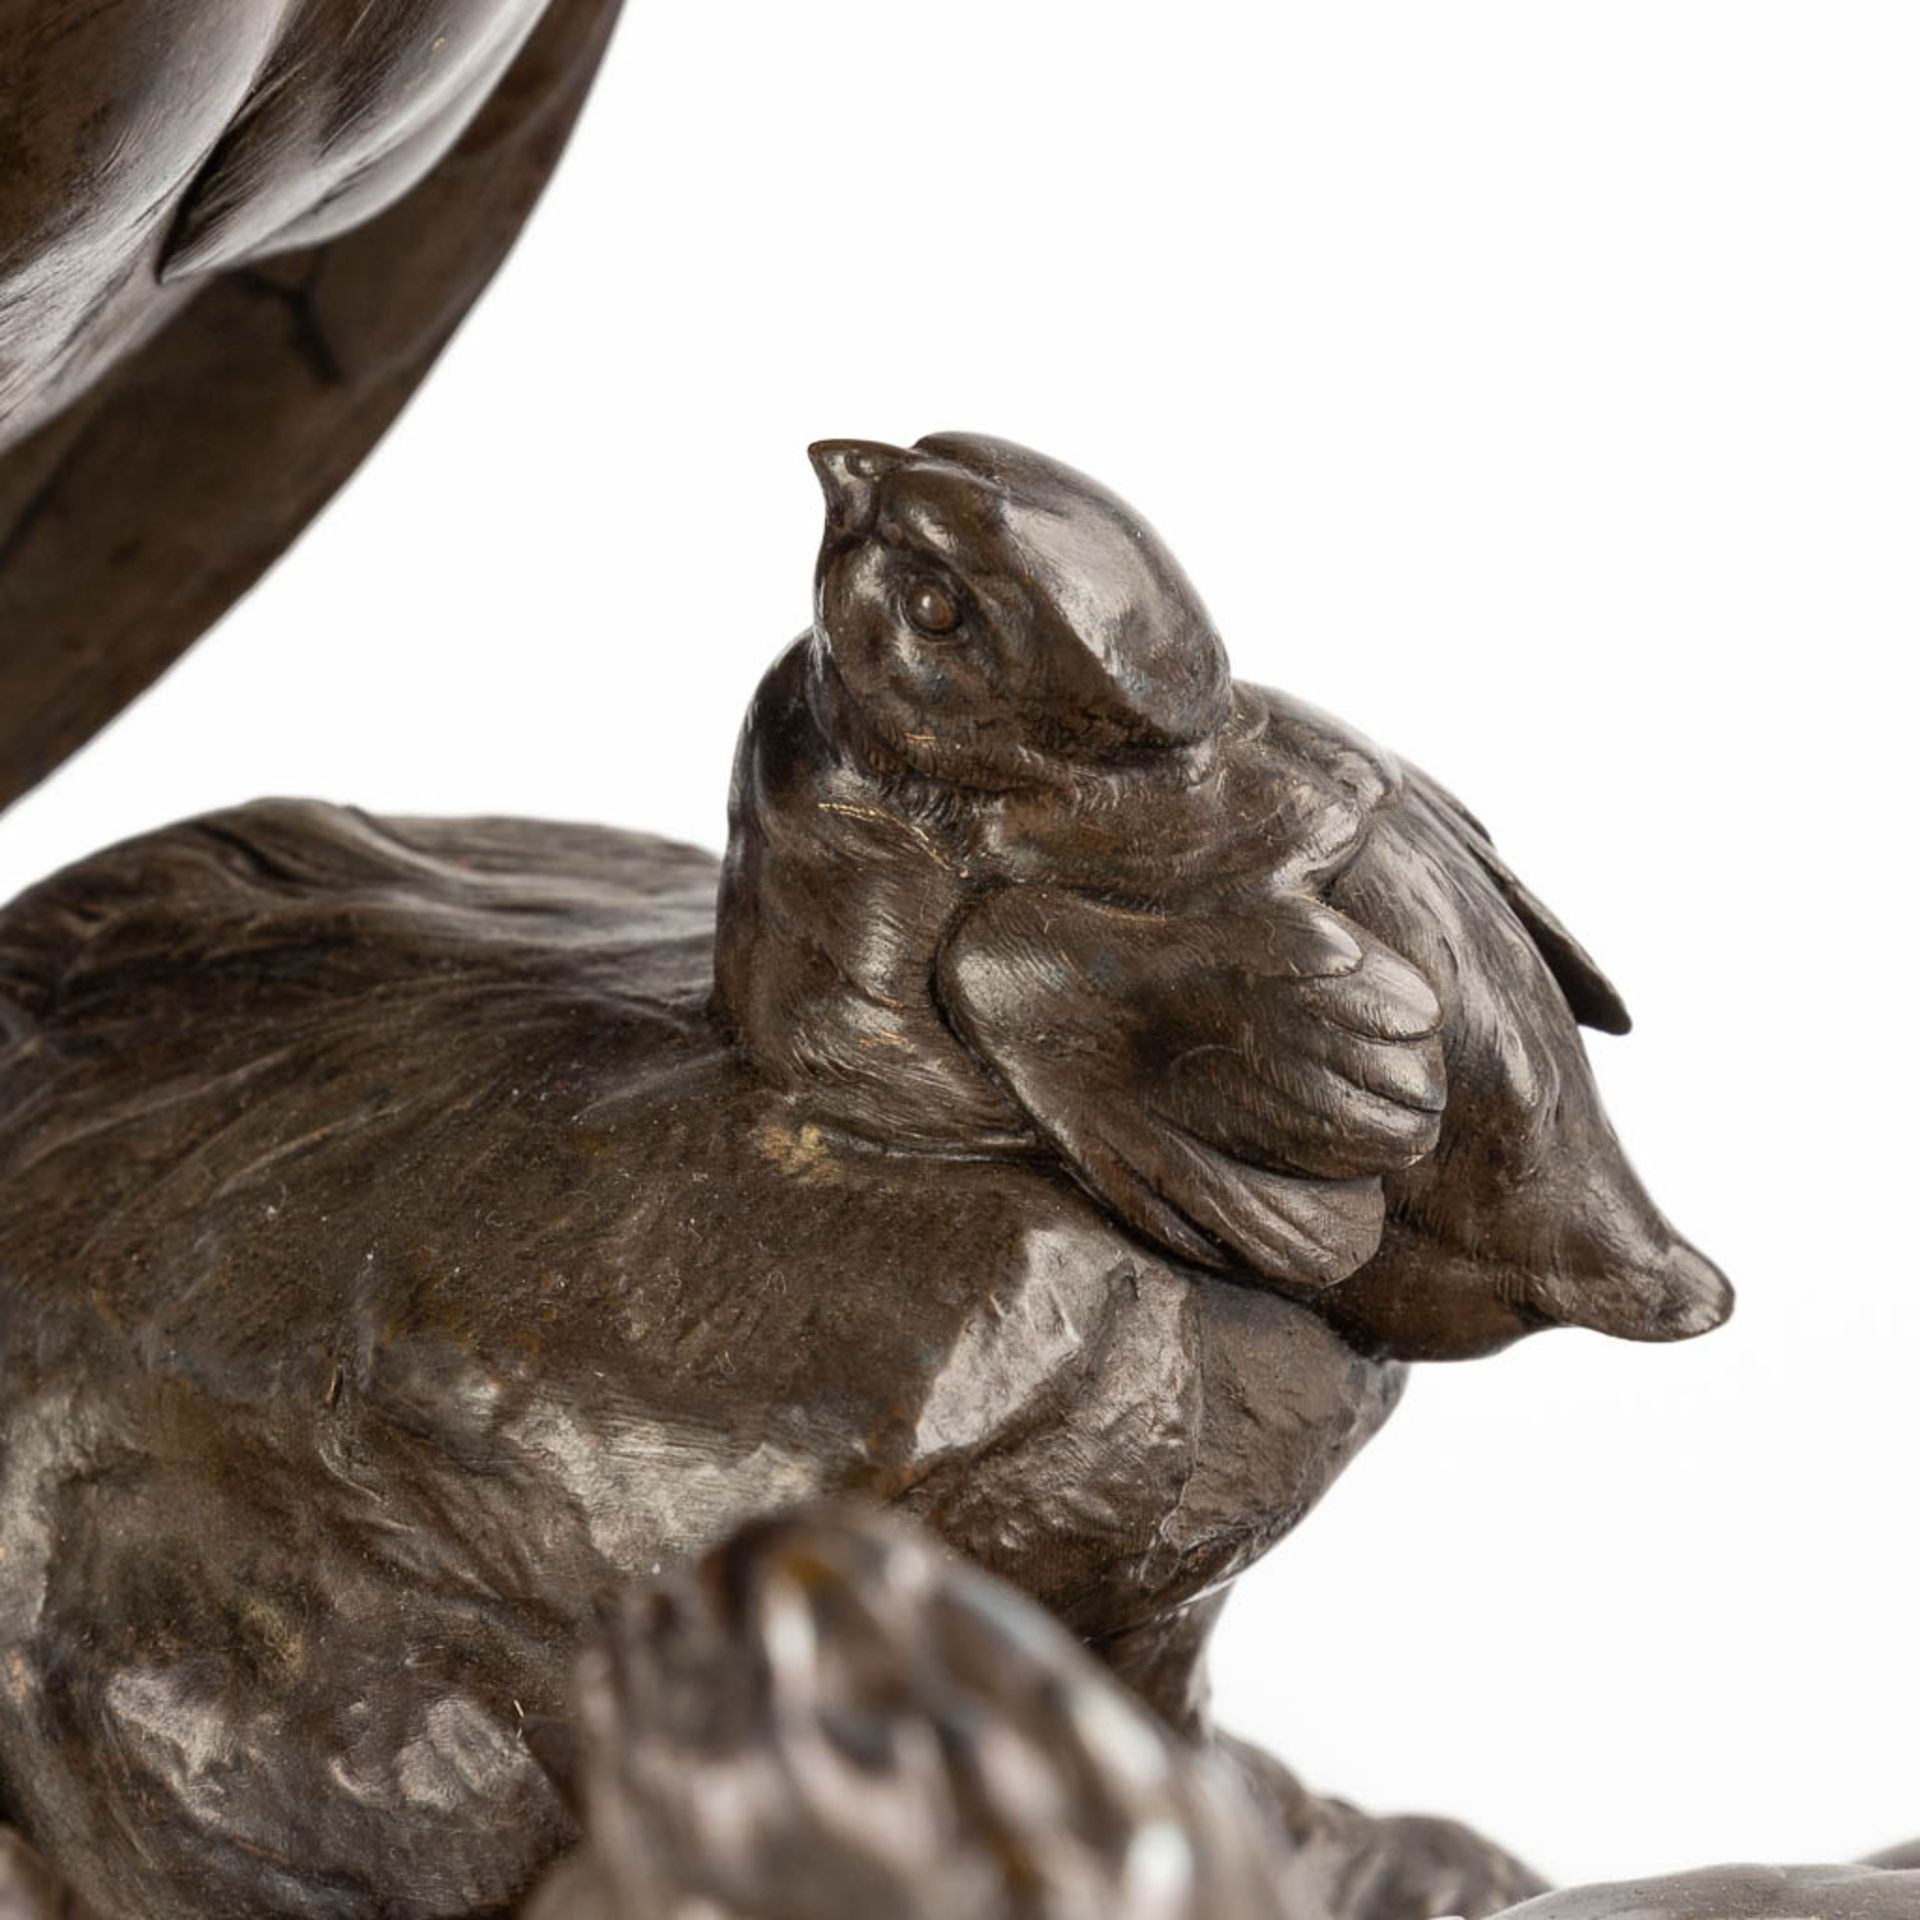 Alphonse ARSON (1822-1895) 'Partridge with chicks' patinated bronze. 1877. (D:22 x W:40 x H:41 cm) - Image 9 of 14